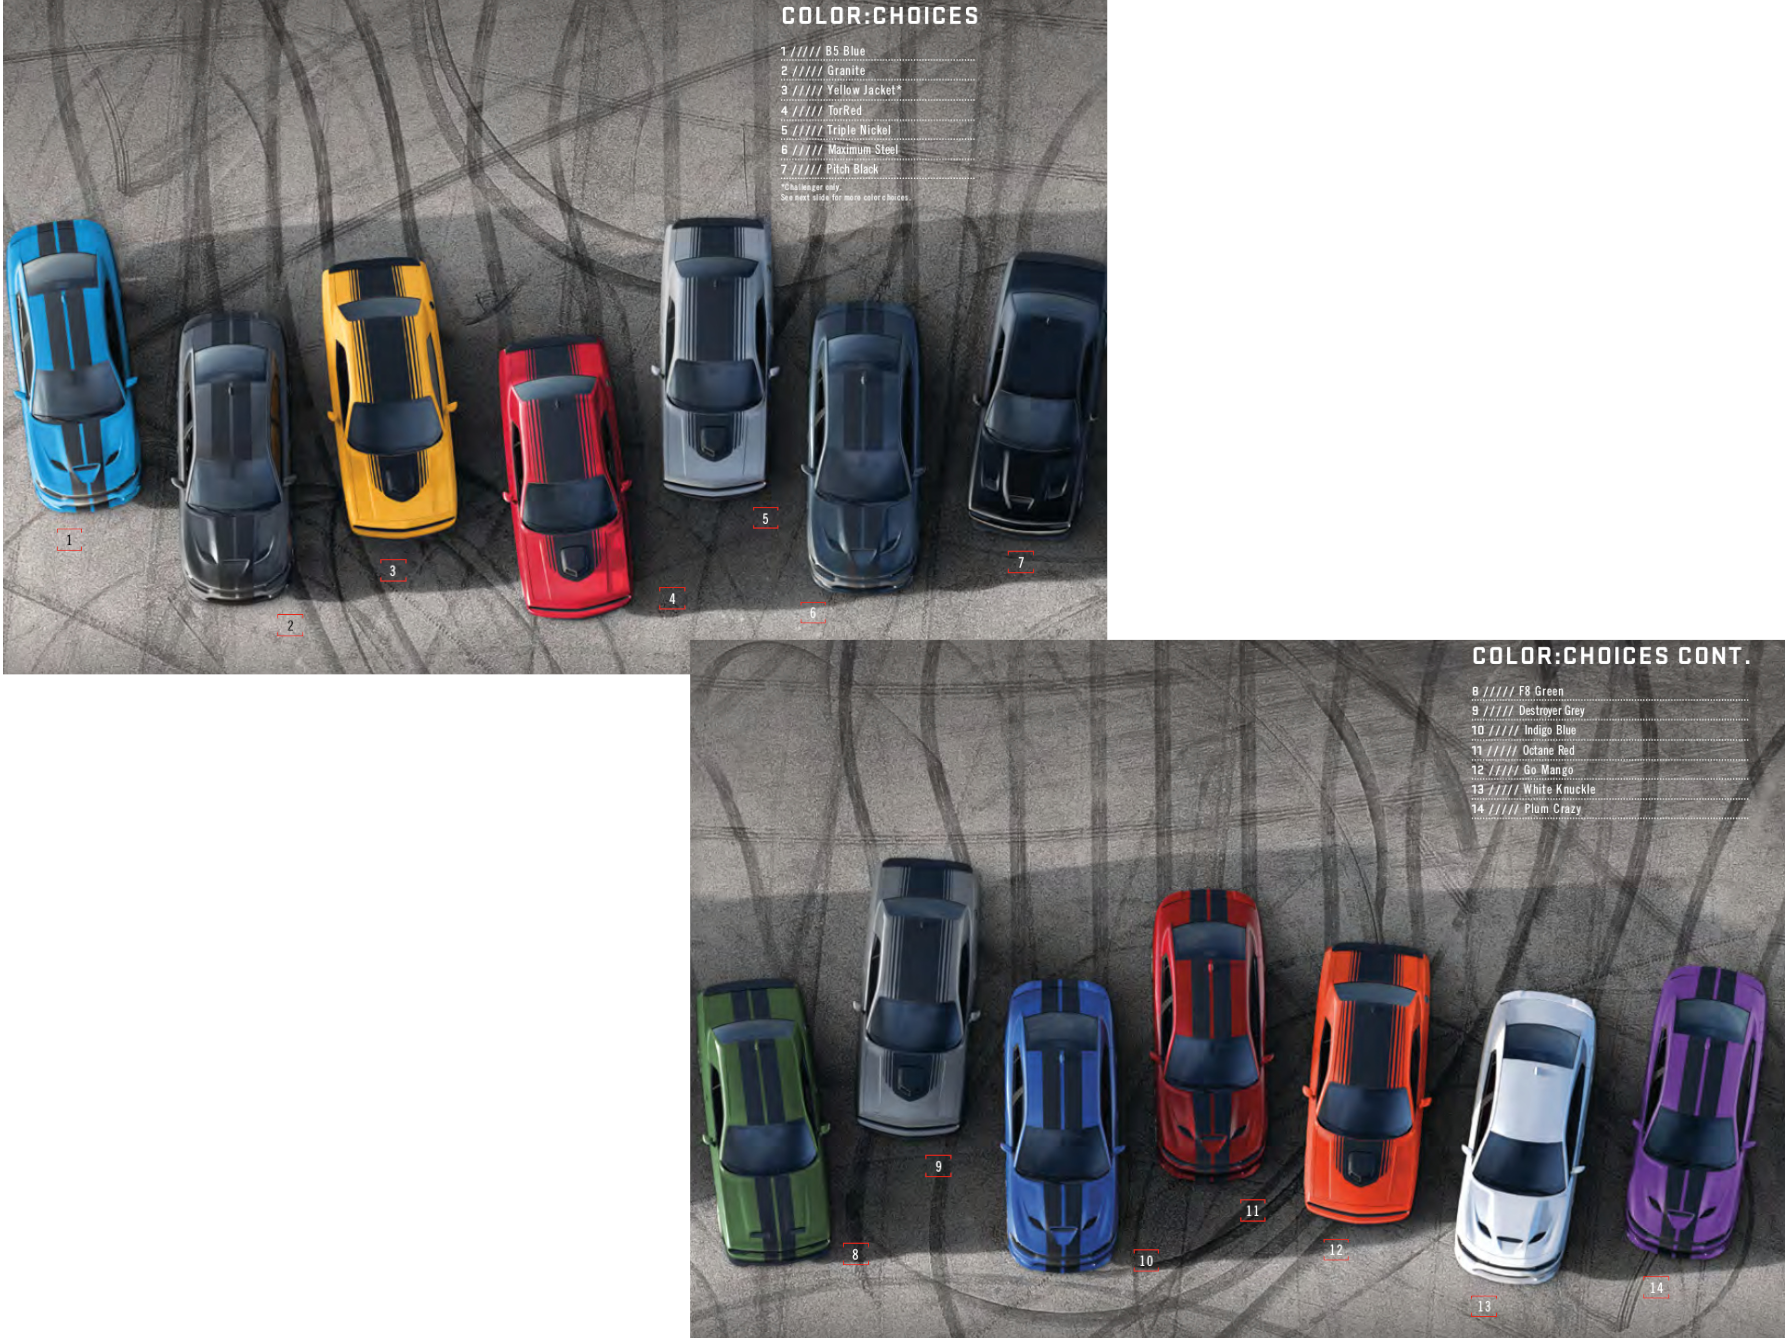 2019 Dodge Challenger color choices